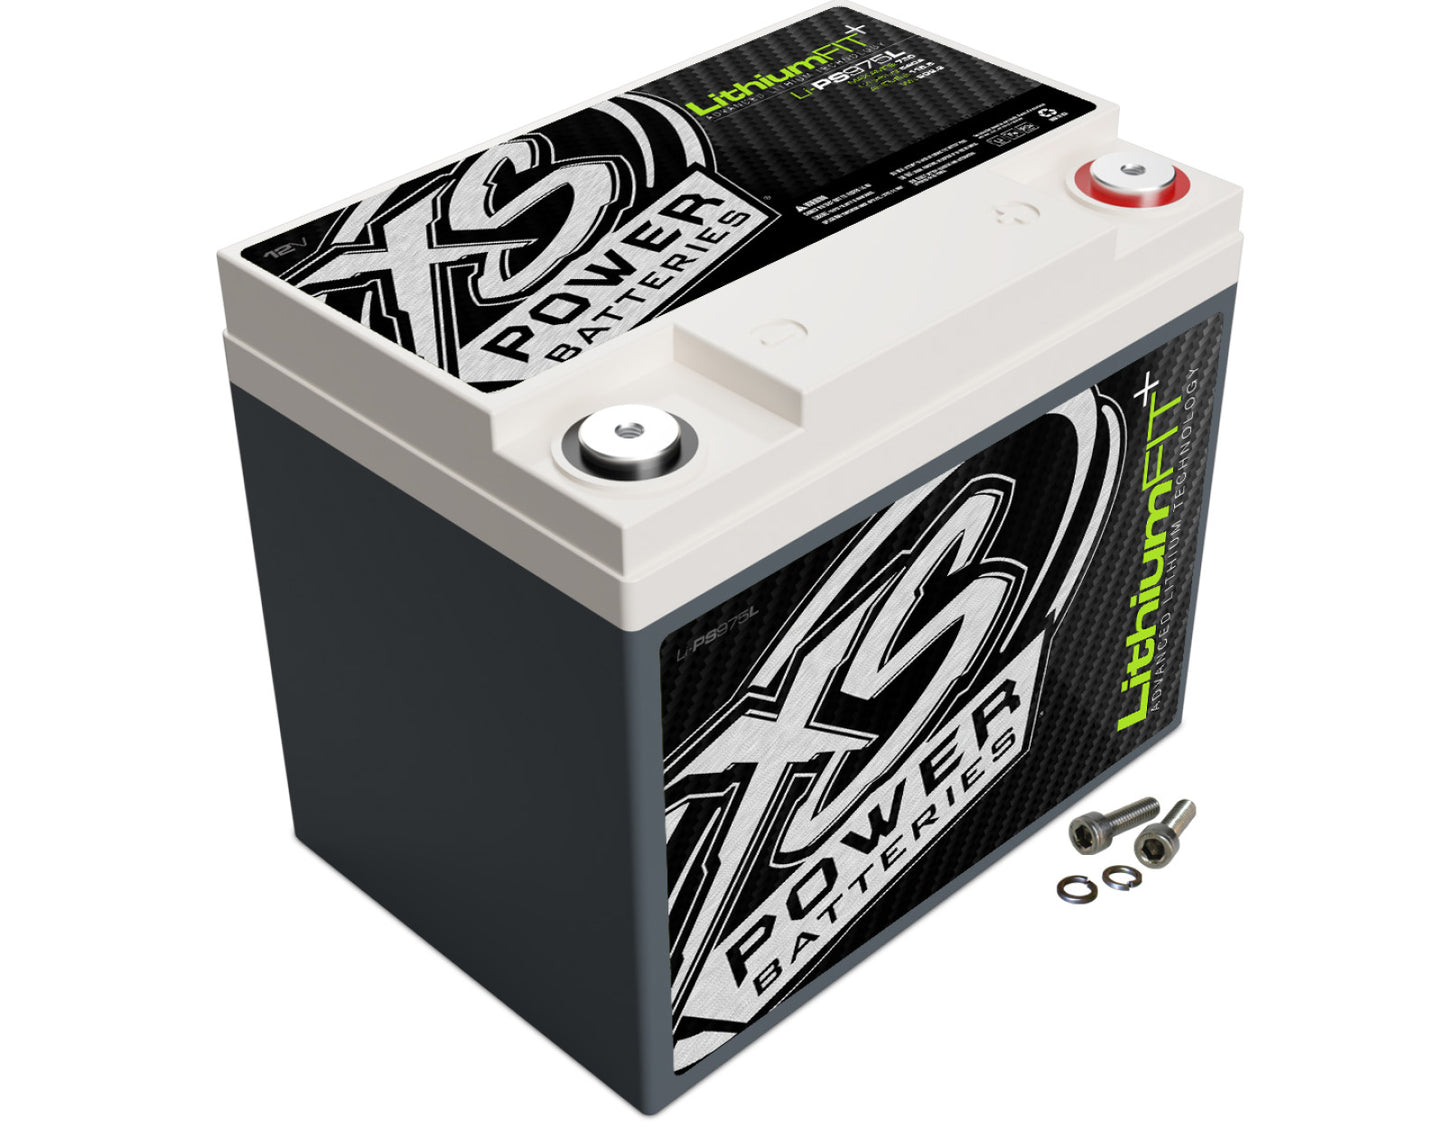 XS Power Batteries Lithium Powersports Series Batteries - M6 Terminal Bolts Included 720 Max Amps Li-PS975L